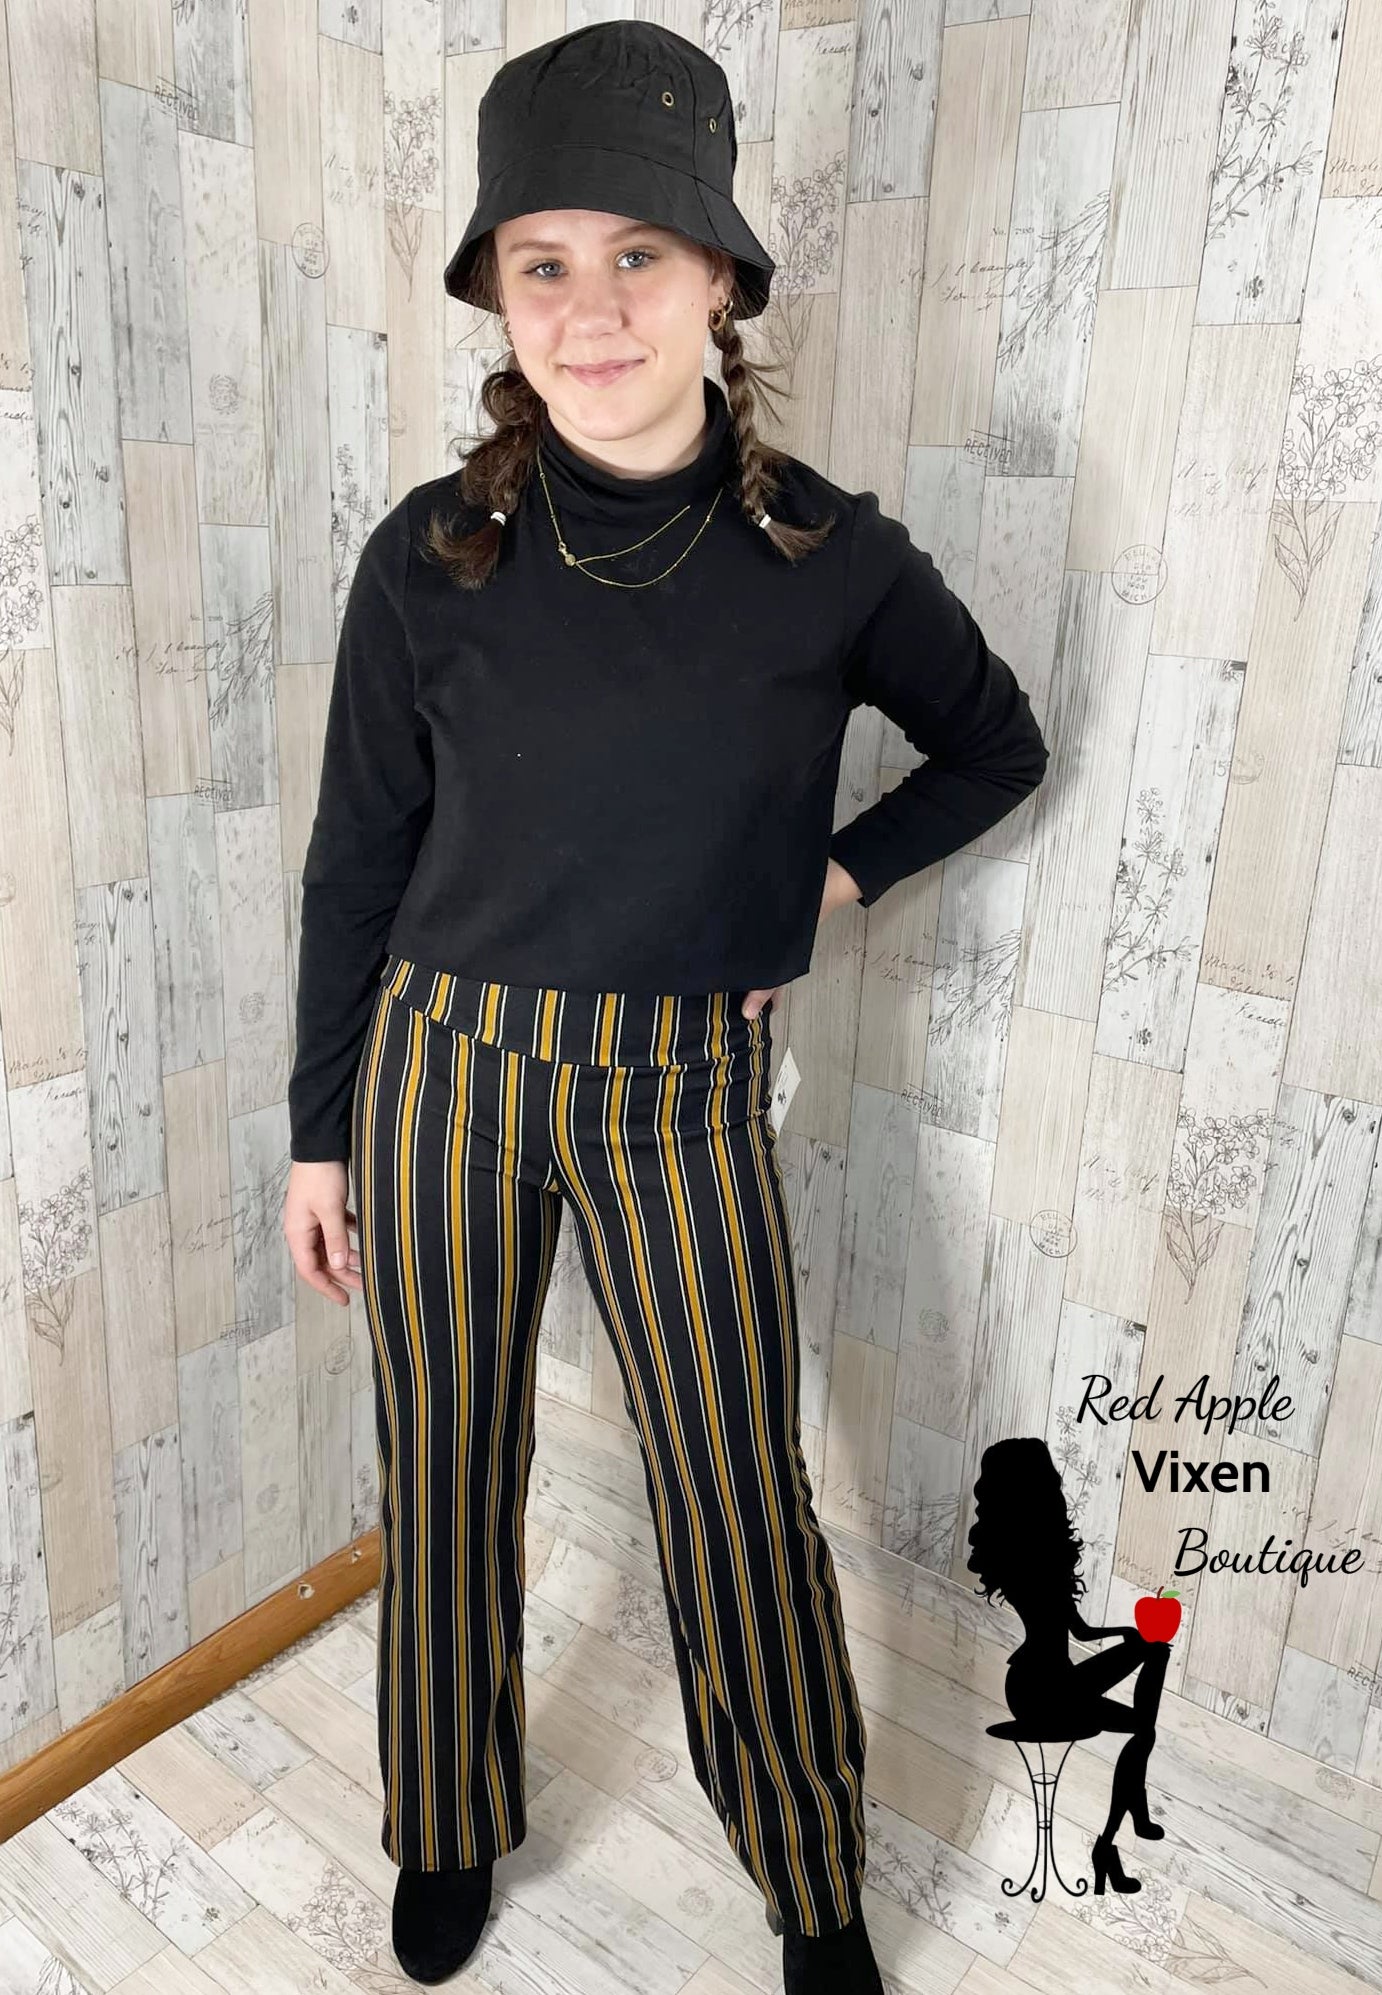 Black and Gold Striped Pants - Red Apple Vixen Boutique